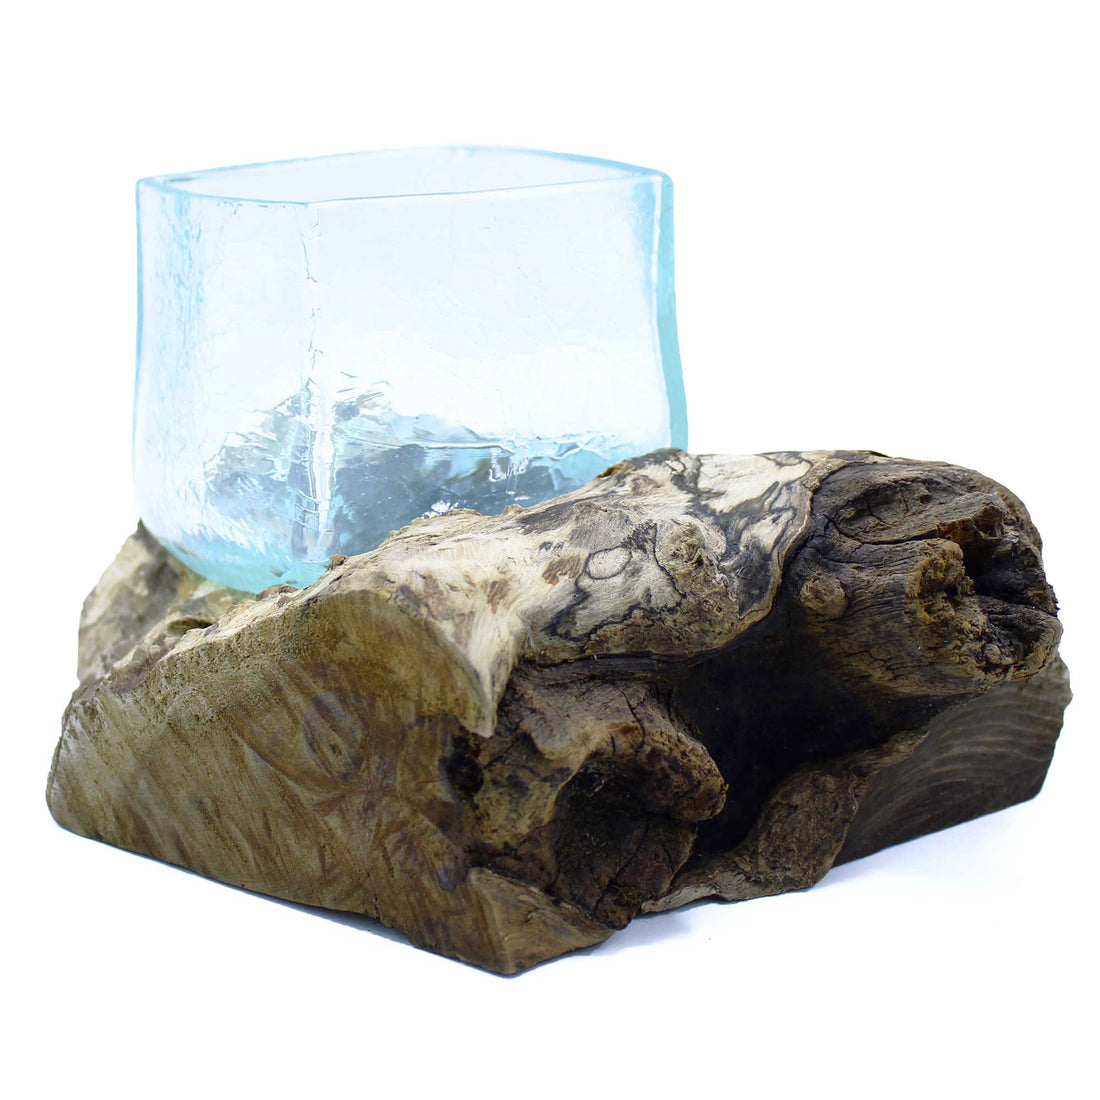 Molten Crackled Glass Tank on Wood - best price from Maltashopper.com MGW-37